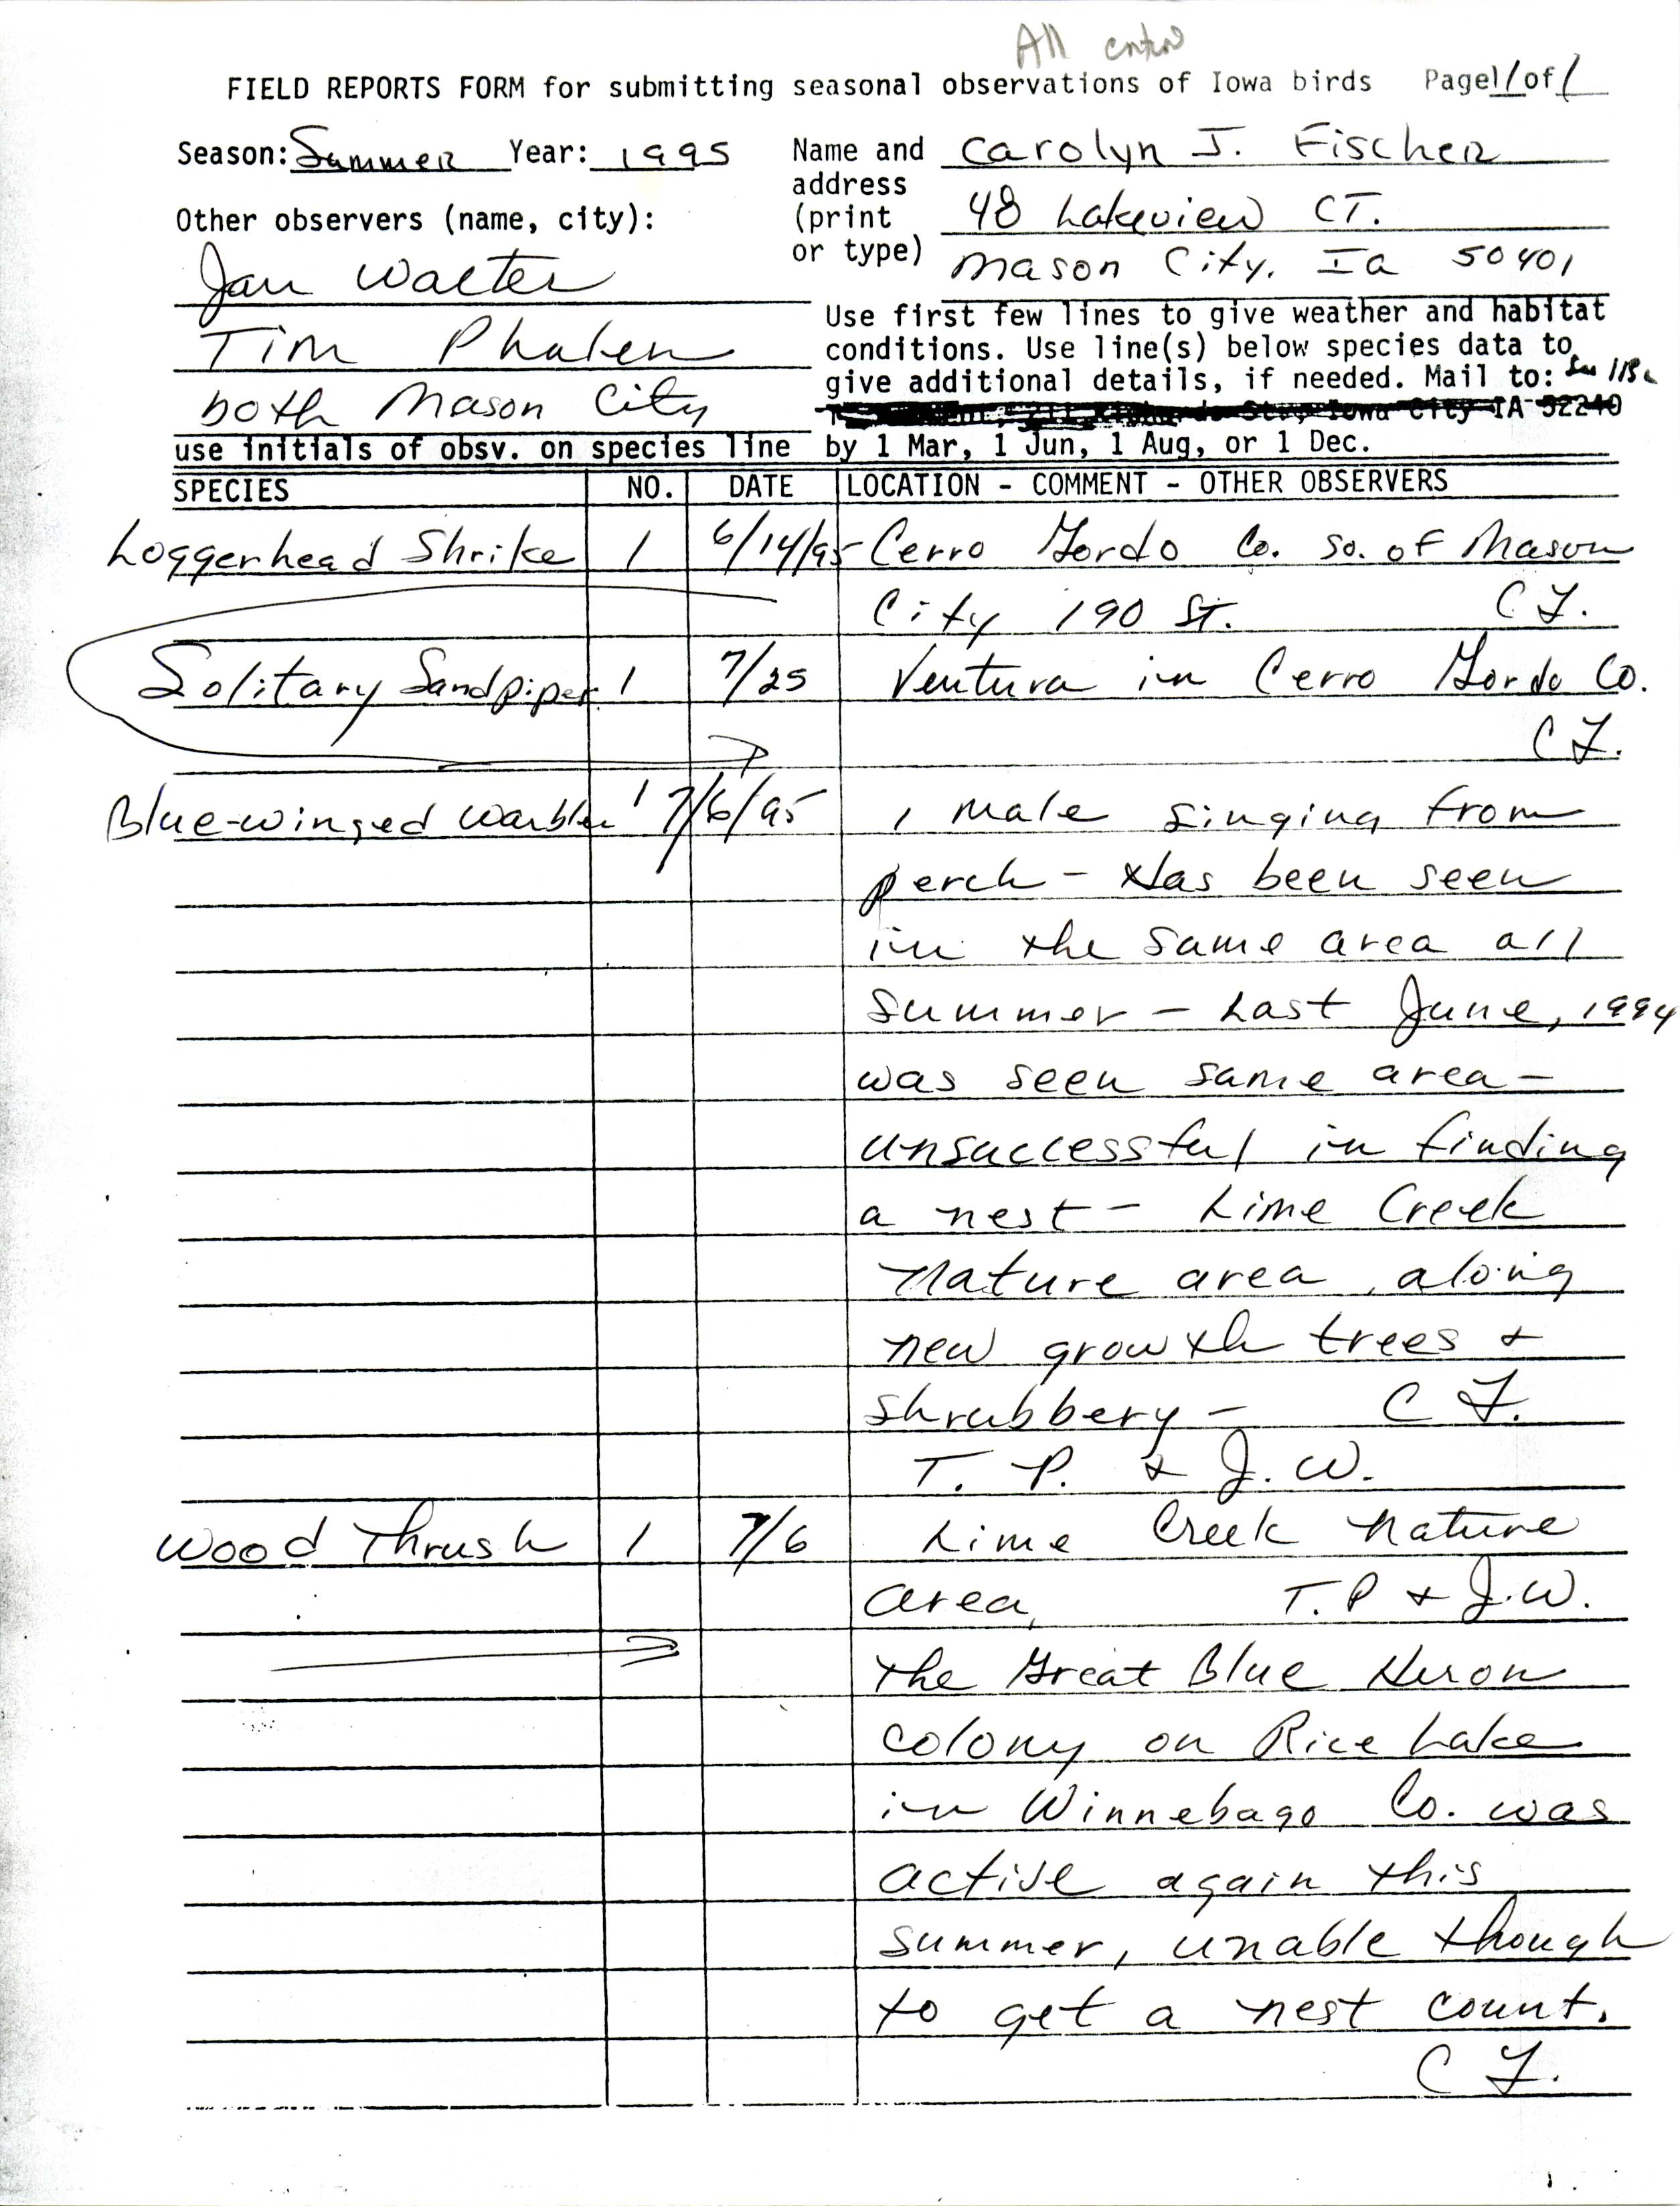 Field reports form for submitting seasonal observations of Iowa birds, summer 1995, Carolyn Fischer